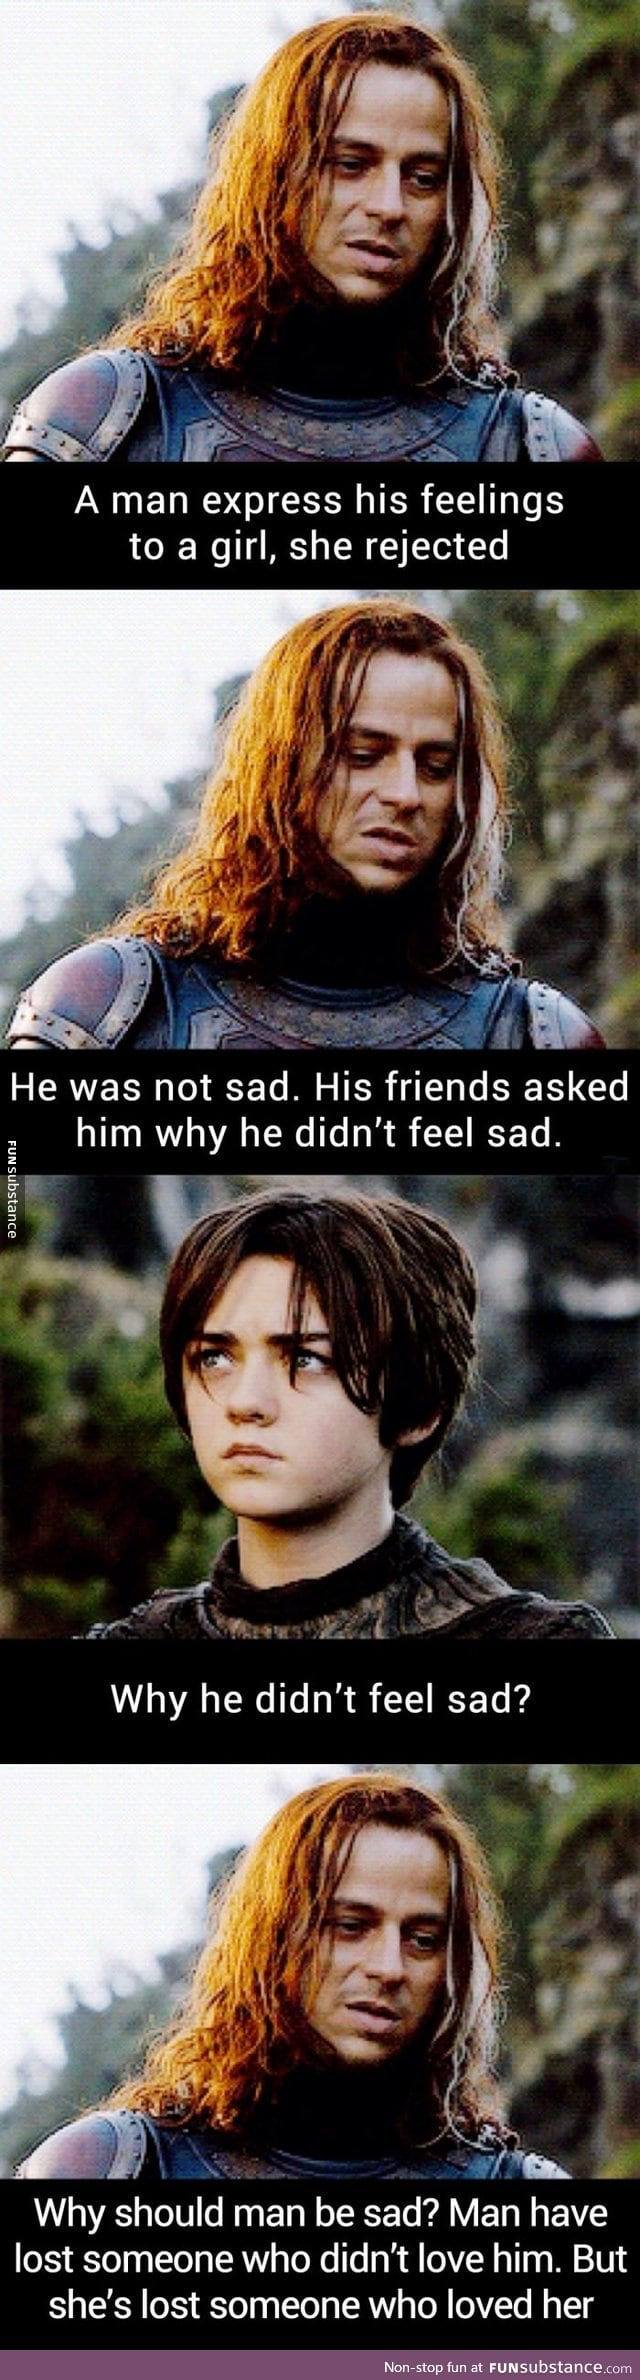 Jaqen H'ghar knows things